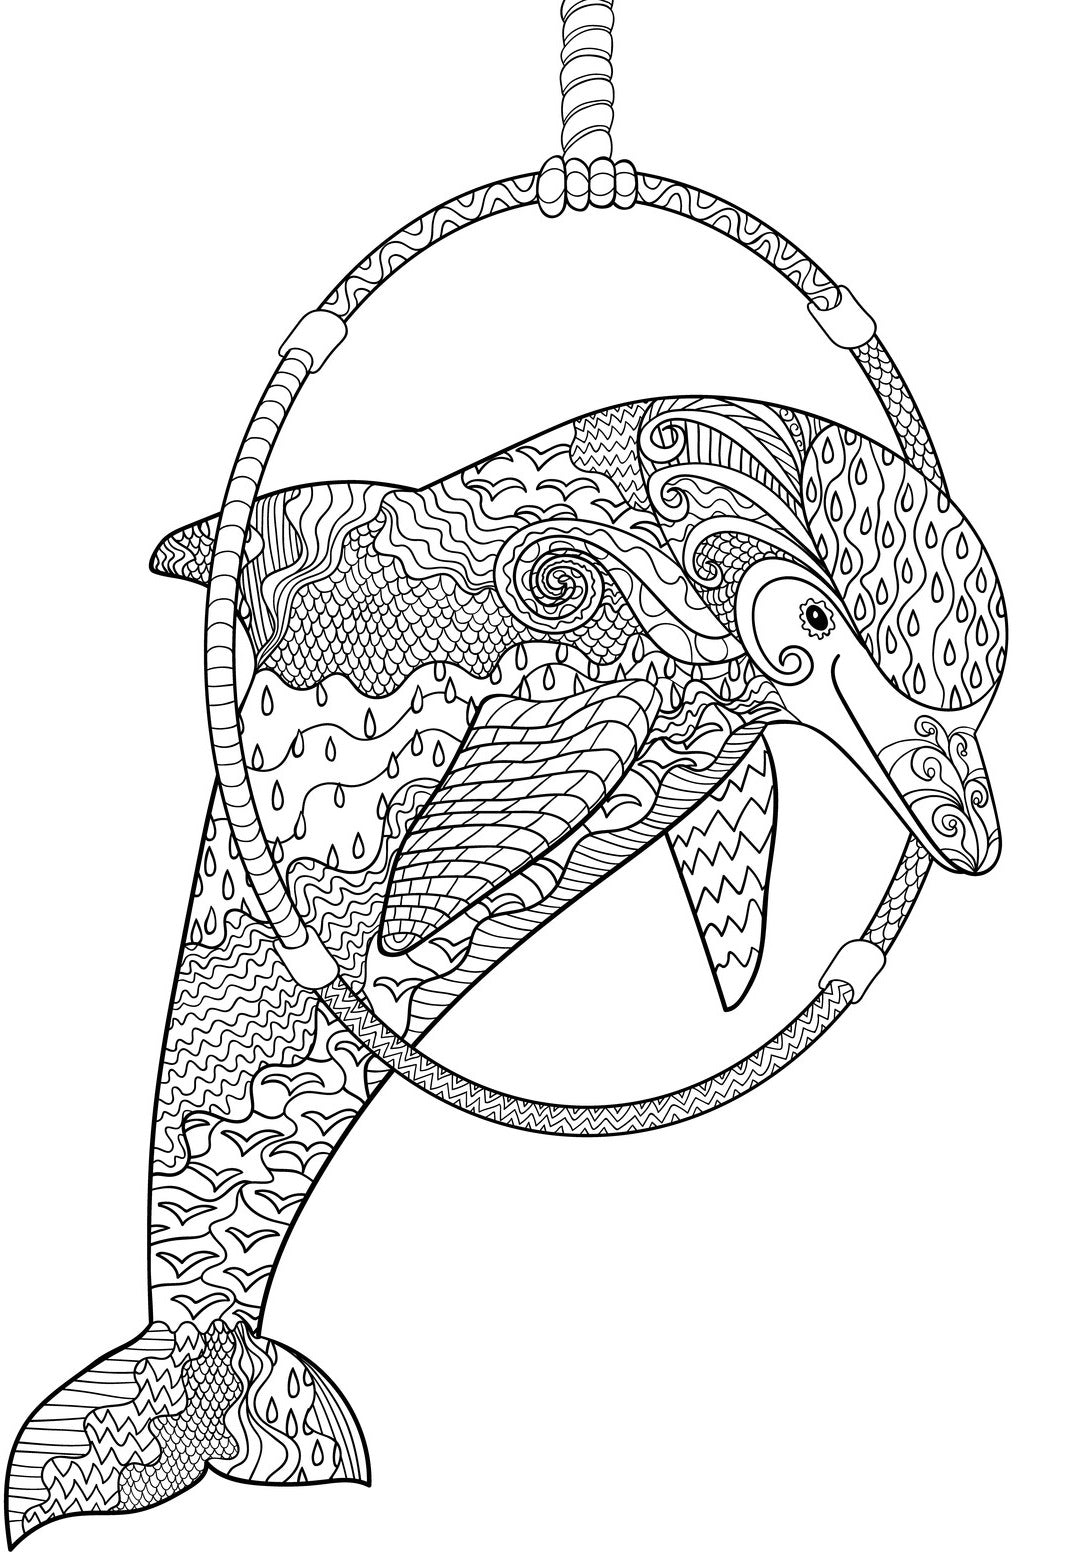 Dolphins, PDF Coloring Book -Relaxing Patterns With Playful Dolphins